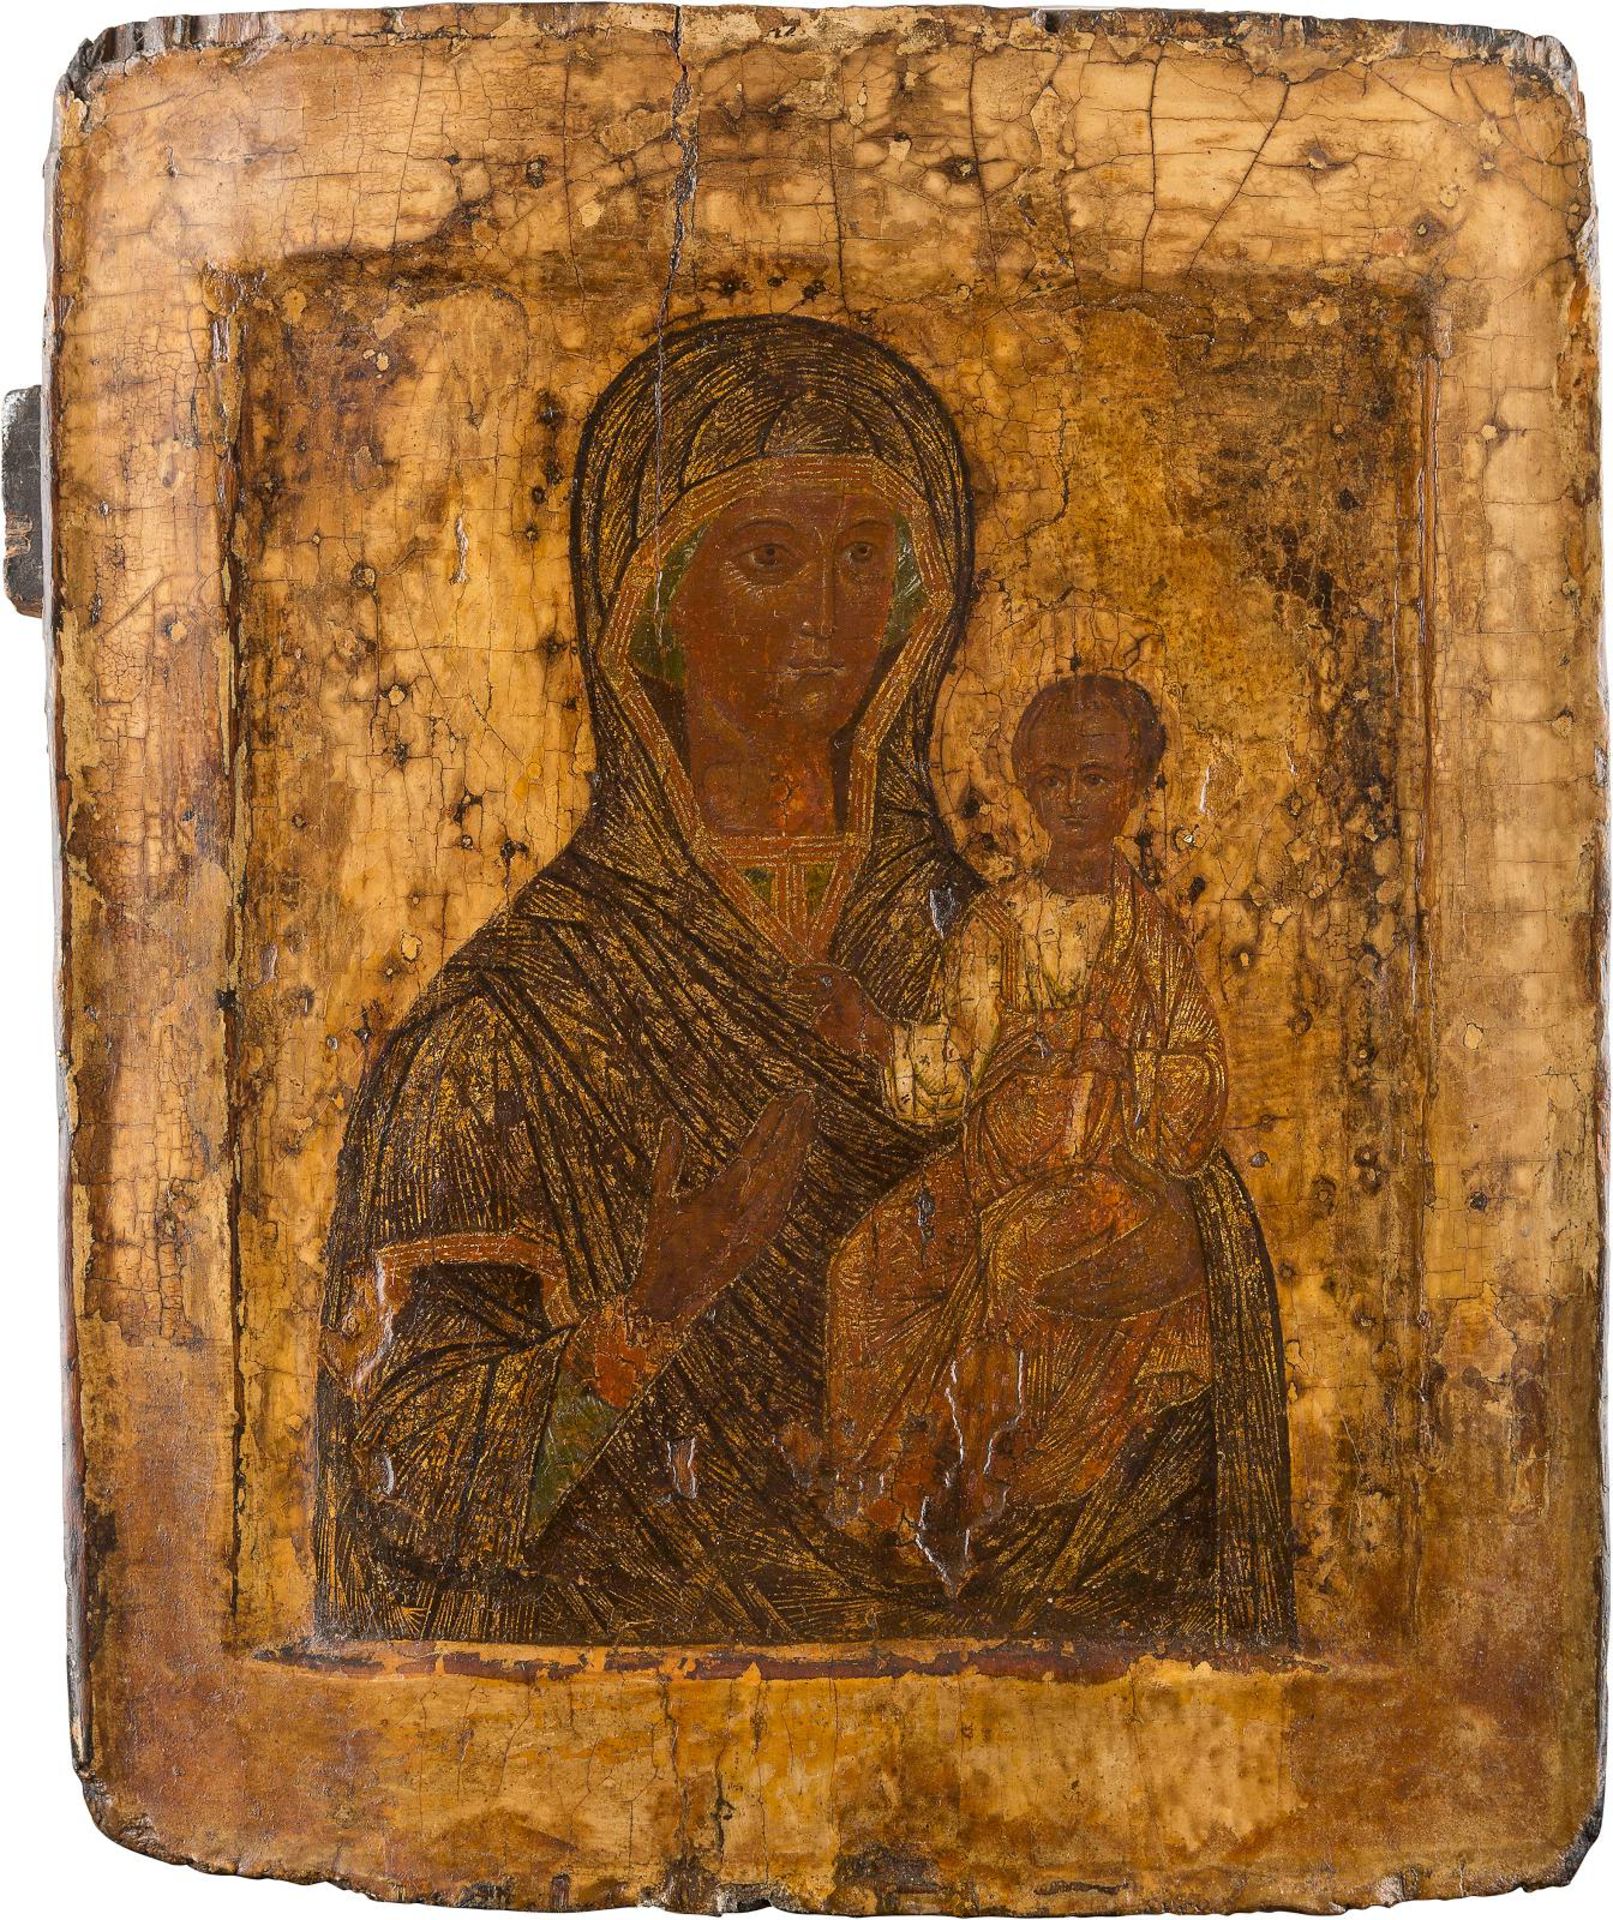 AN ICON OF THE SMOLENSKAYA MOTHER OF GODRussian, 16th century Tempera on wood panel with double